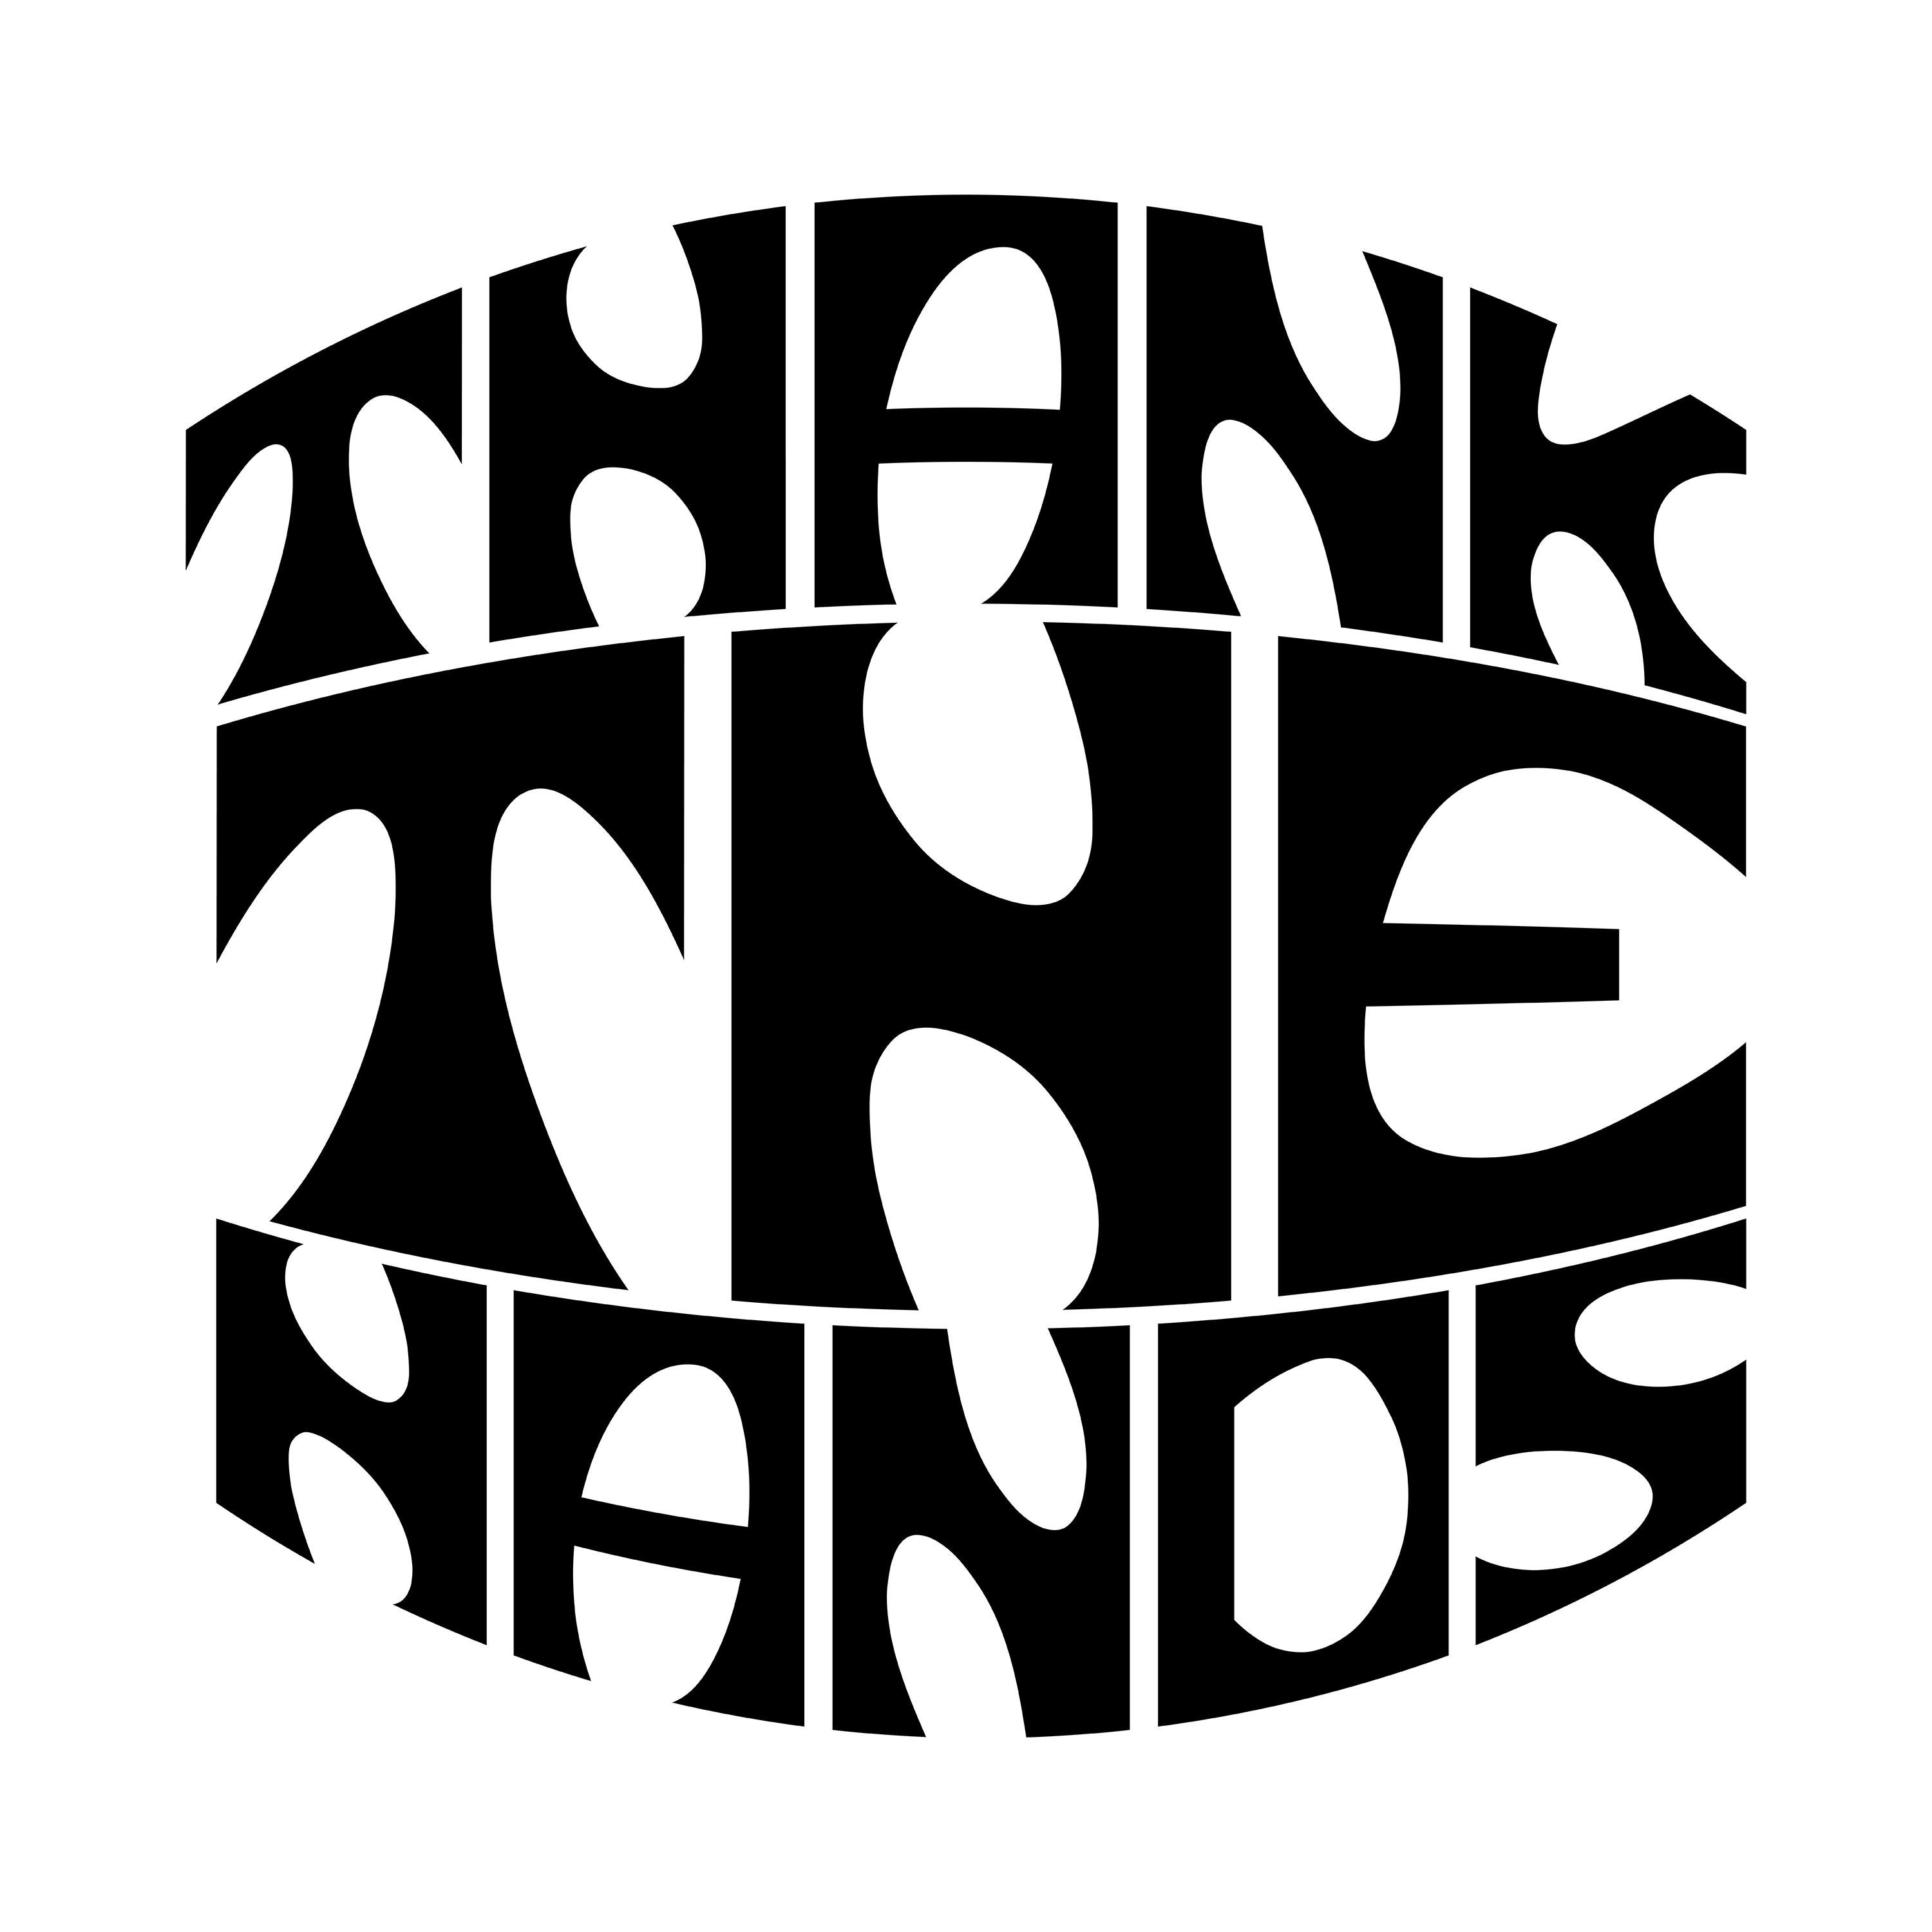 THANK THE HANDS